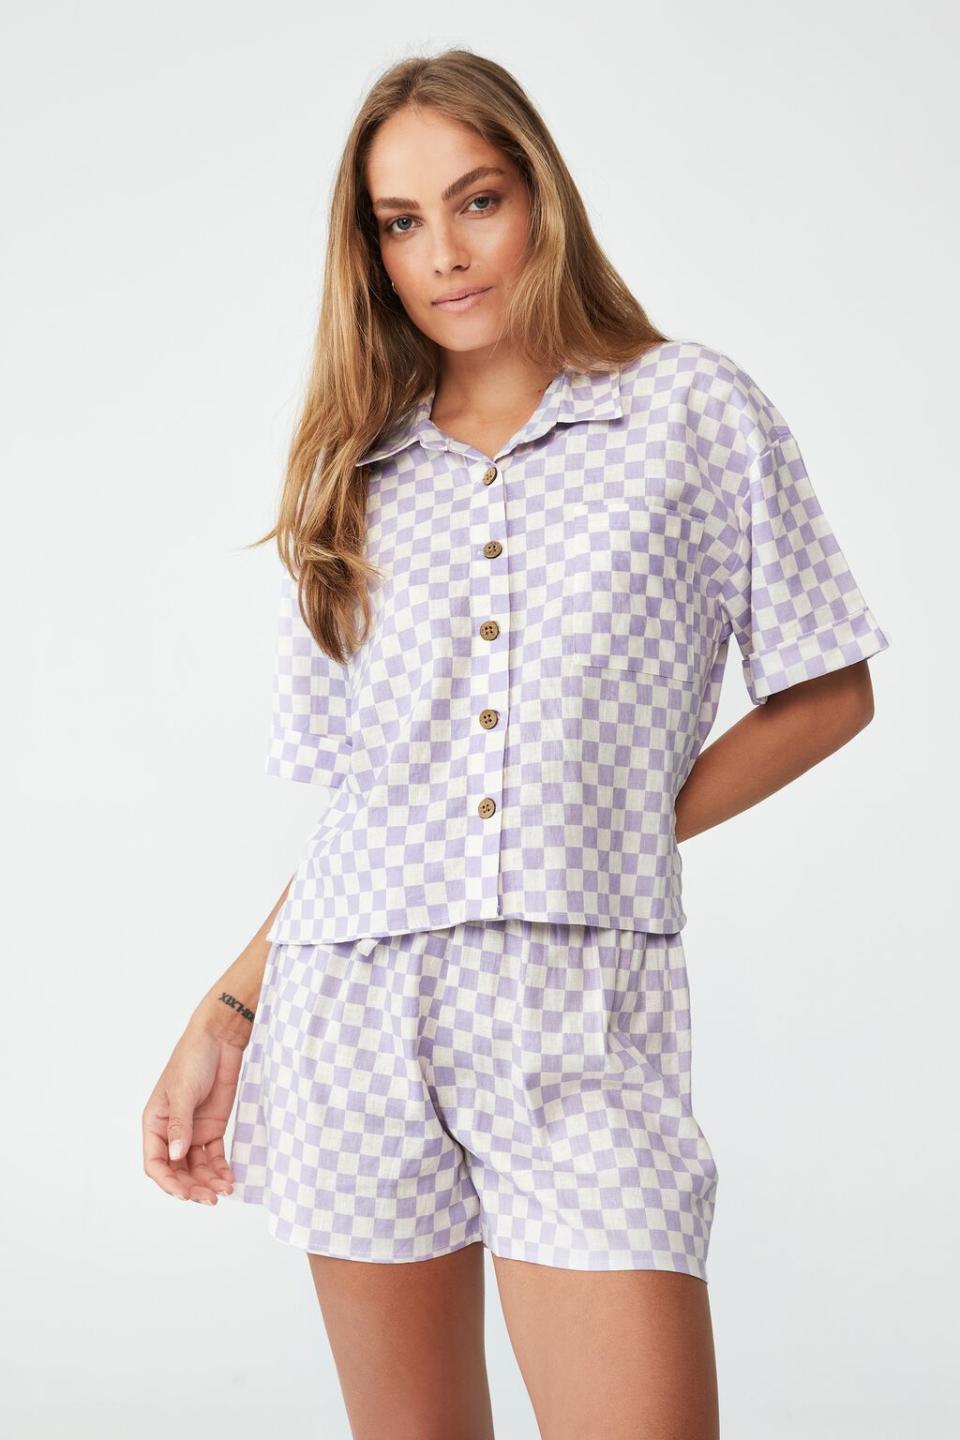 Girl with long hair stands in check short pyjamas